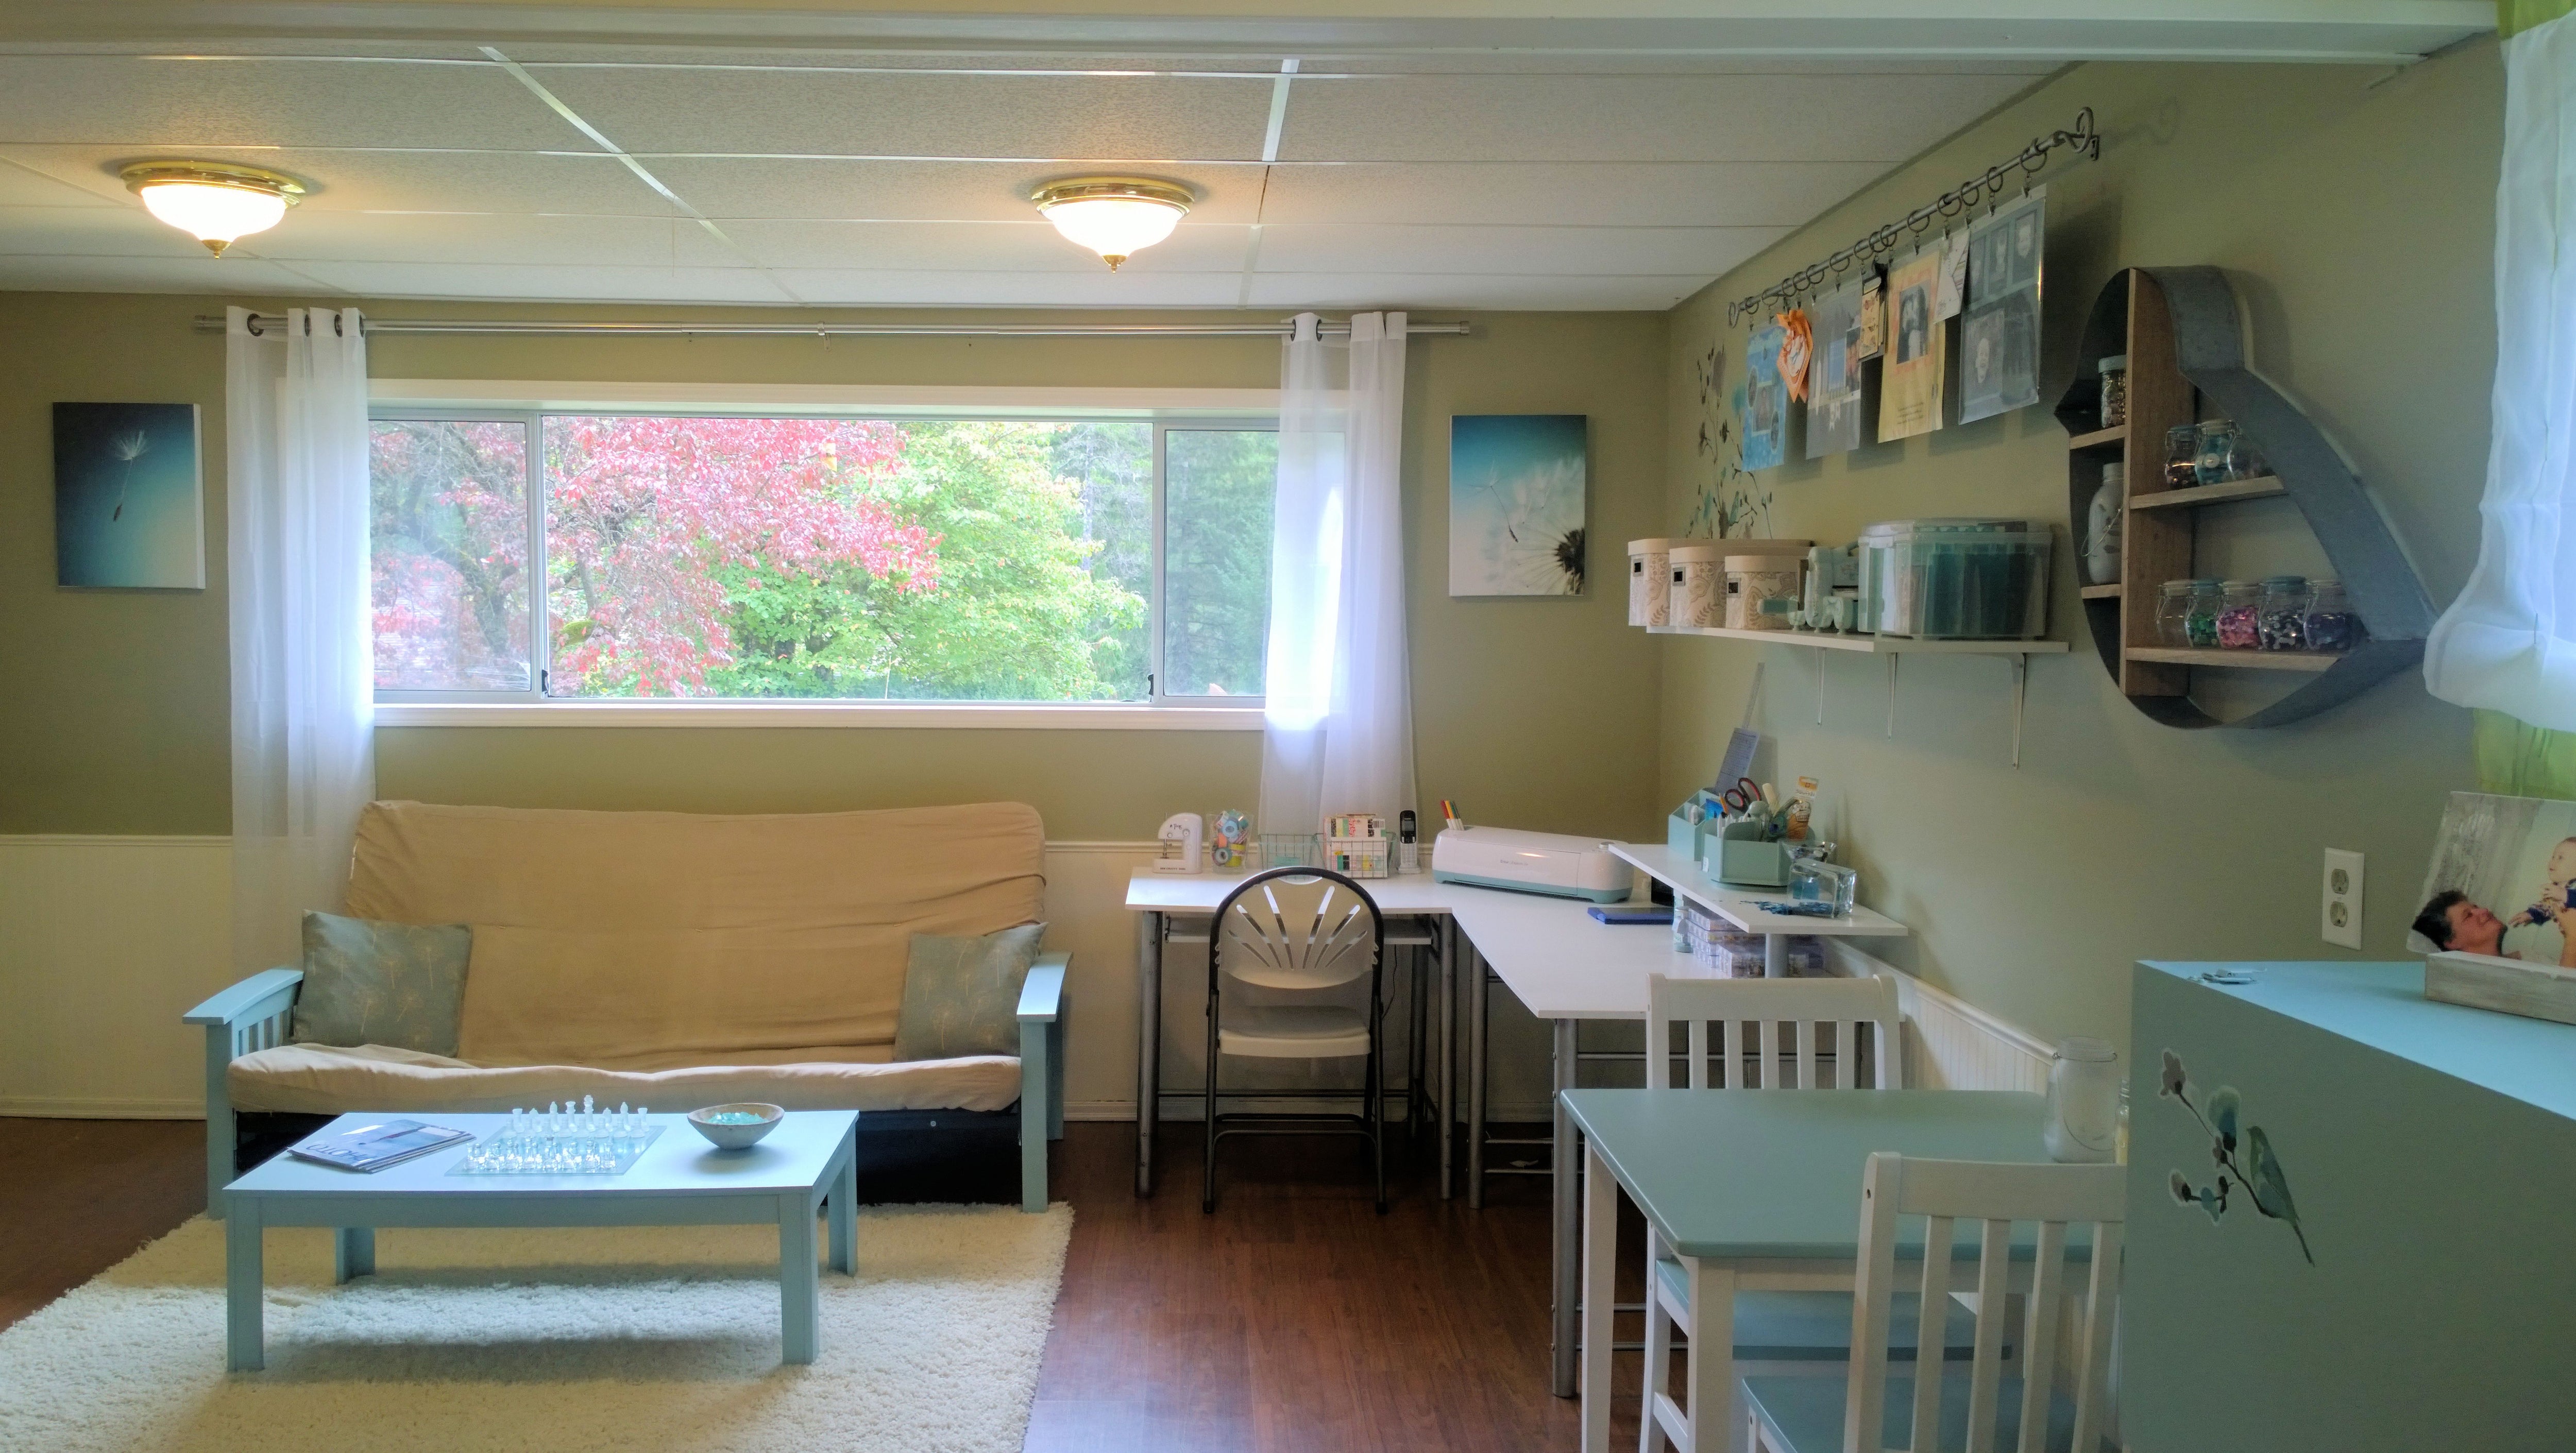 Room makeover project - after photo of teen bedroom transformed into a craft room